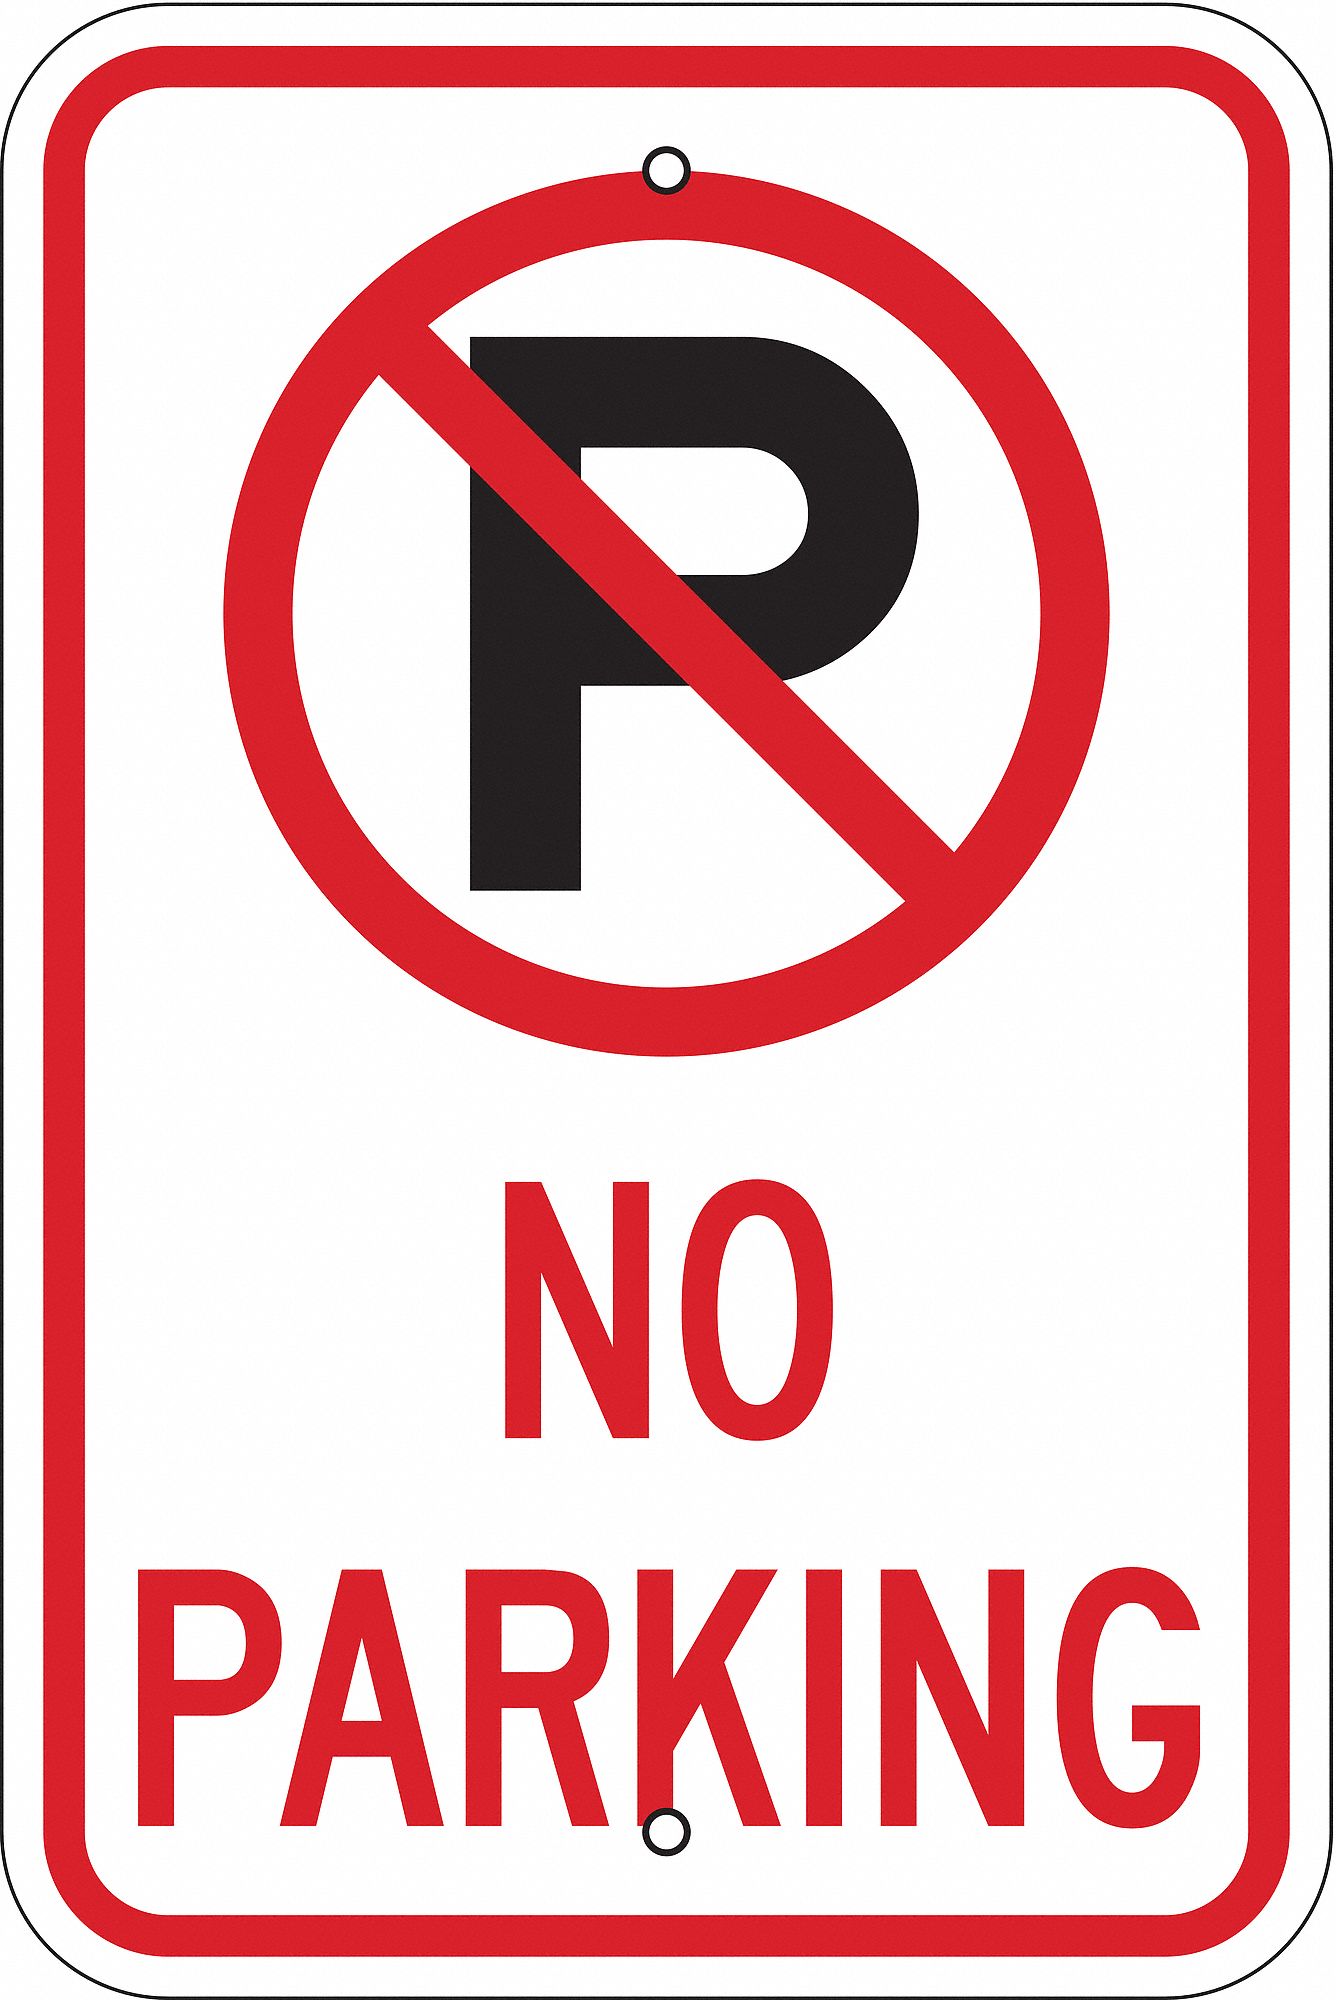 Text and SymbolNo Parking Brady B-959 Reflective Aluminum, No Parking Sign Height 18